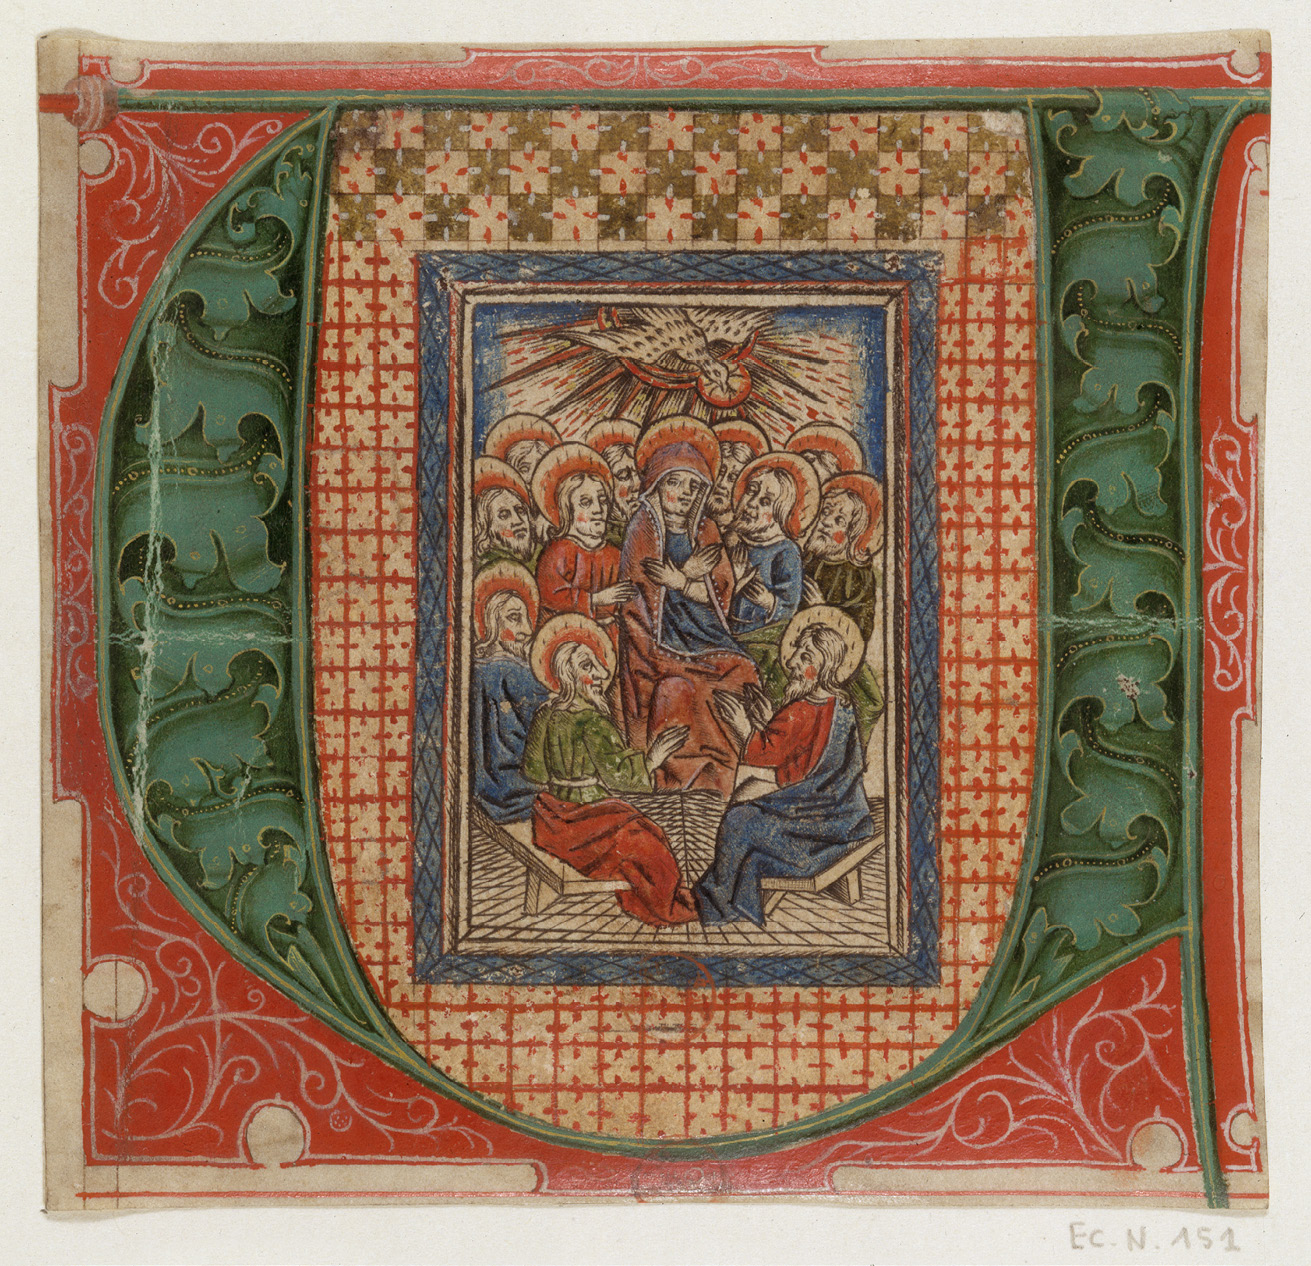 Fig. 117  Pentecost engraving pasted into a painted initial removed from a manuscript. Paris, BnF, Département des Estampes, Ea 18 c Res (Lehrs 25). Published with kind permission from the Bibliothèque nationale de France.